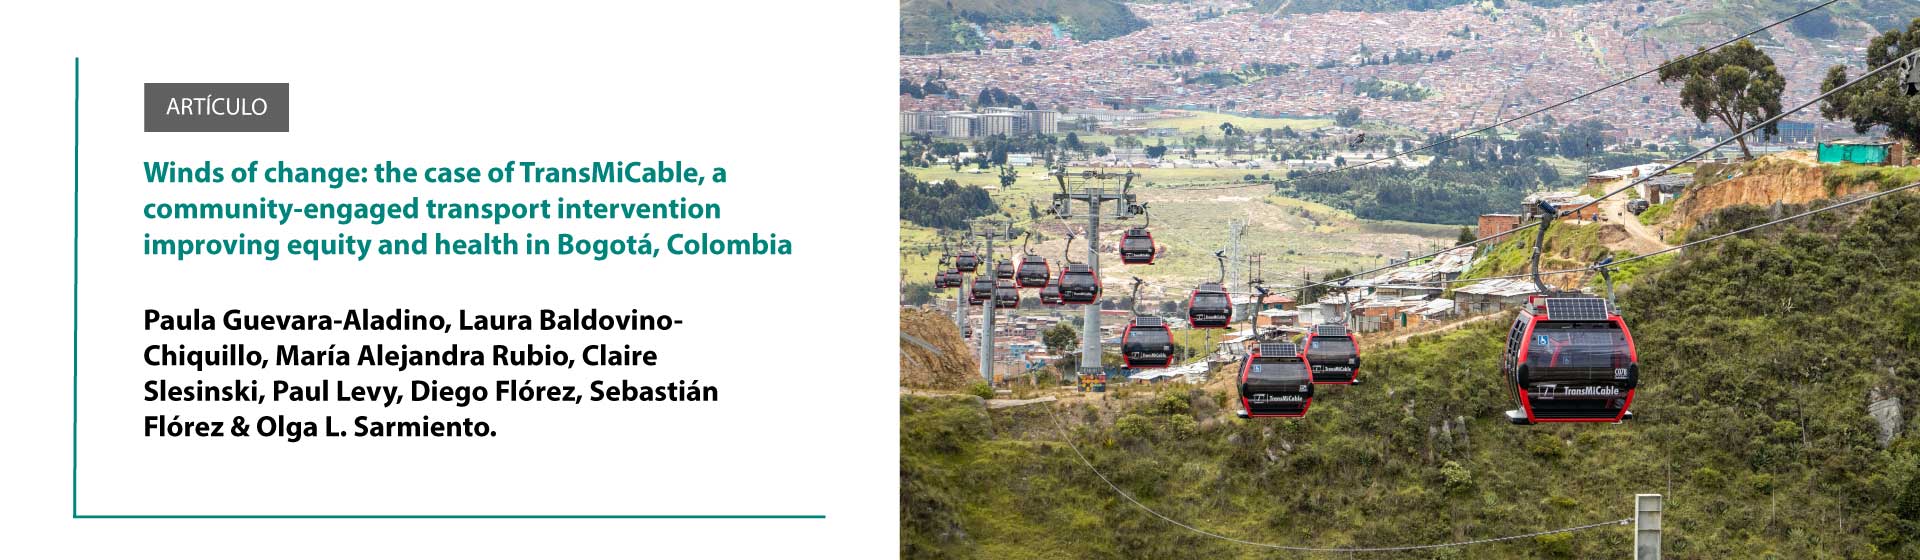 Winds of change: the case of TransMiCable, a community-engaged transport intervention improving equity and health in Bogotá, Colombia